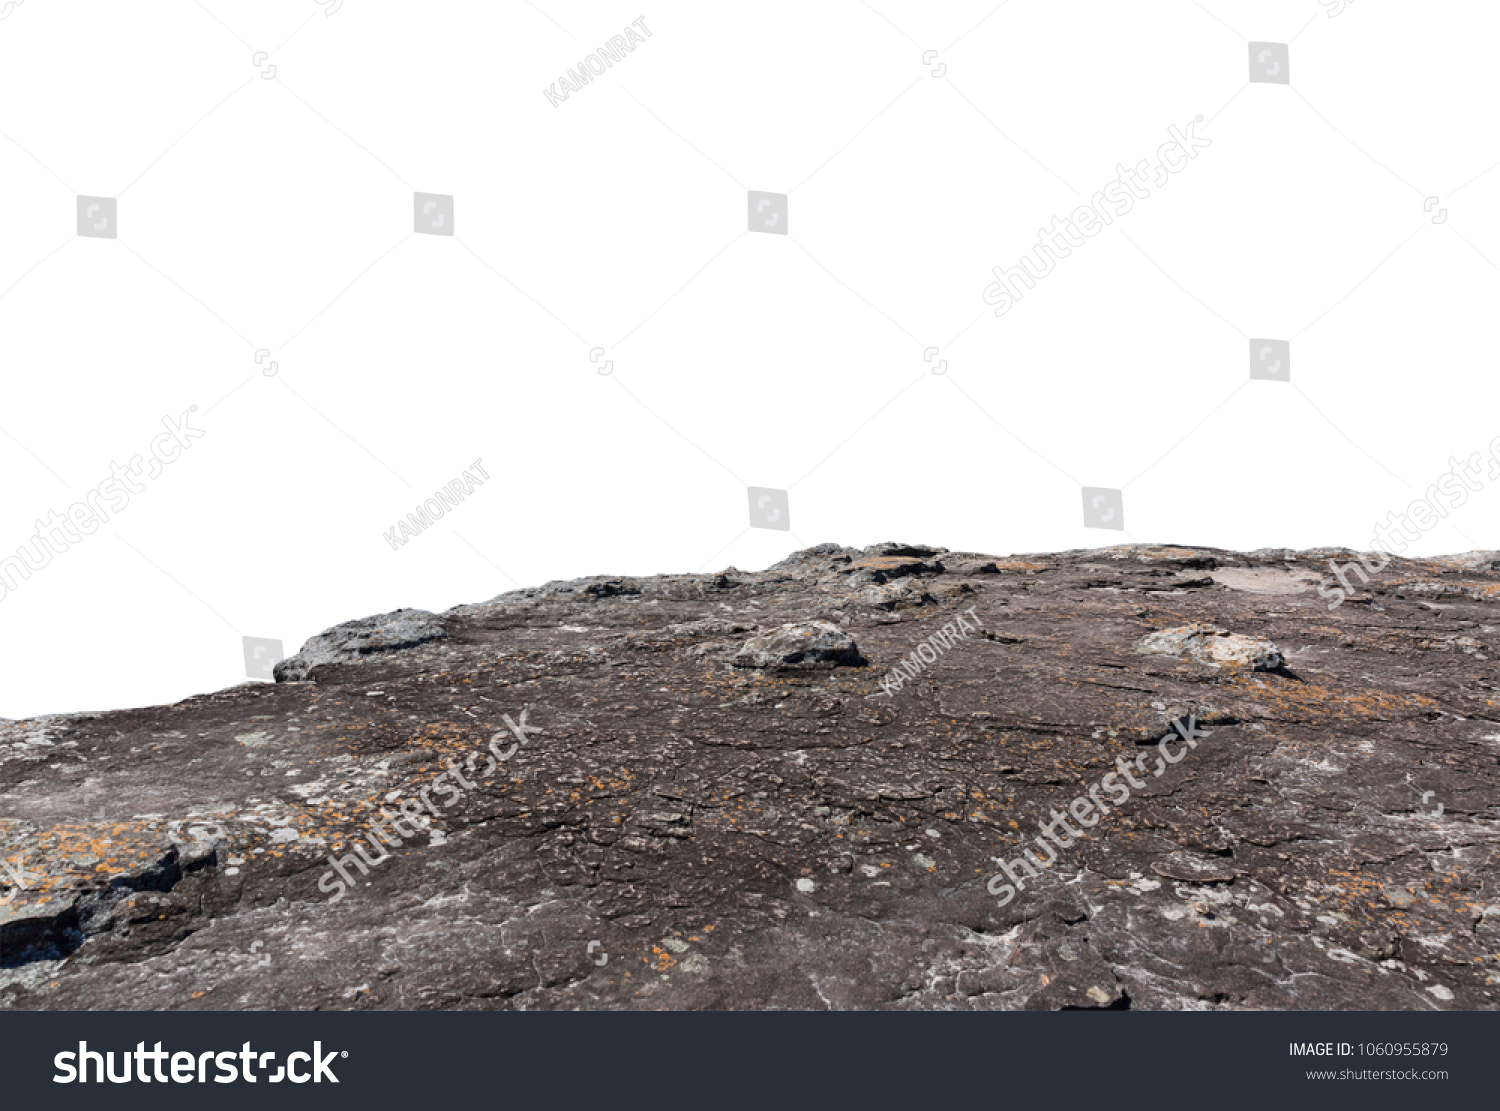 Cliff stone located part of the mountain rock isolated on white background. #1060955879